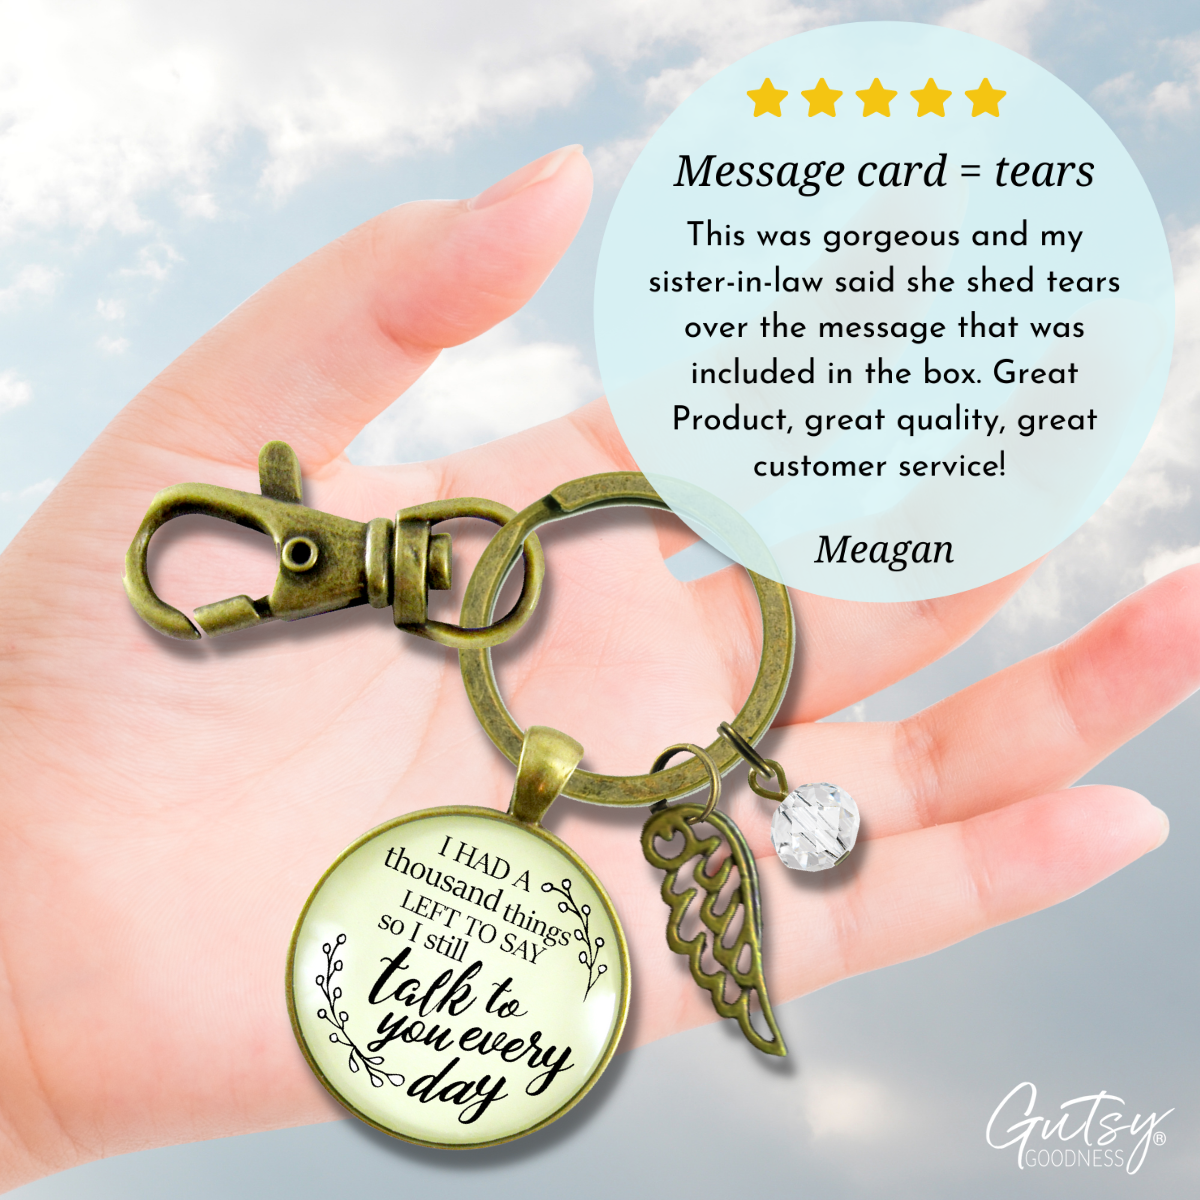 Remembrance Keychain Thousand Things Miss You Memorial Jewelry - Gutsy Goodness Handmade Jewelry;Remembrance Keychain Thousand Things Miss You Memorial Jewelry - Gutsy Goodness Handmade Jewelry Gifts